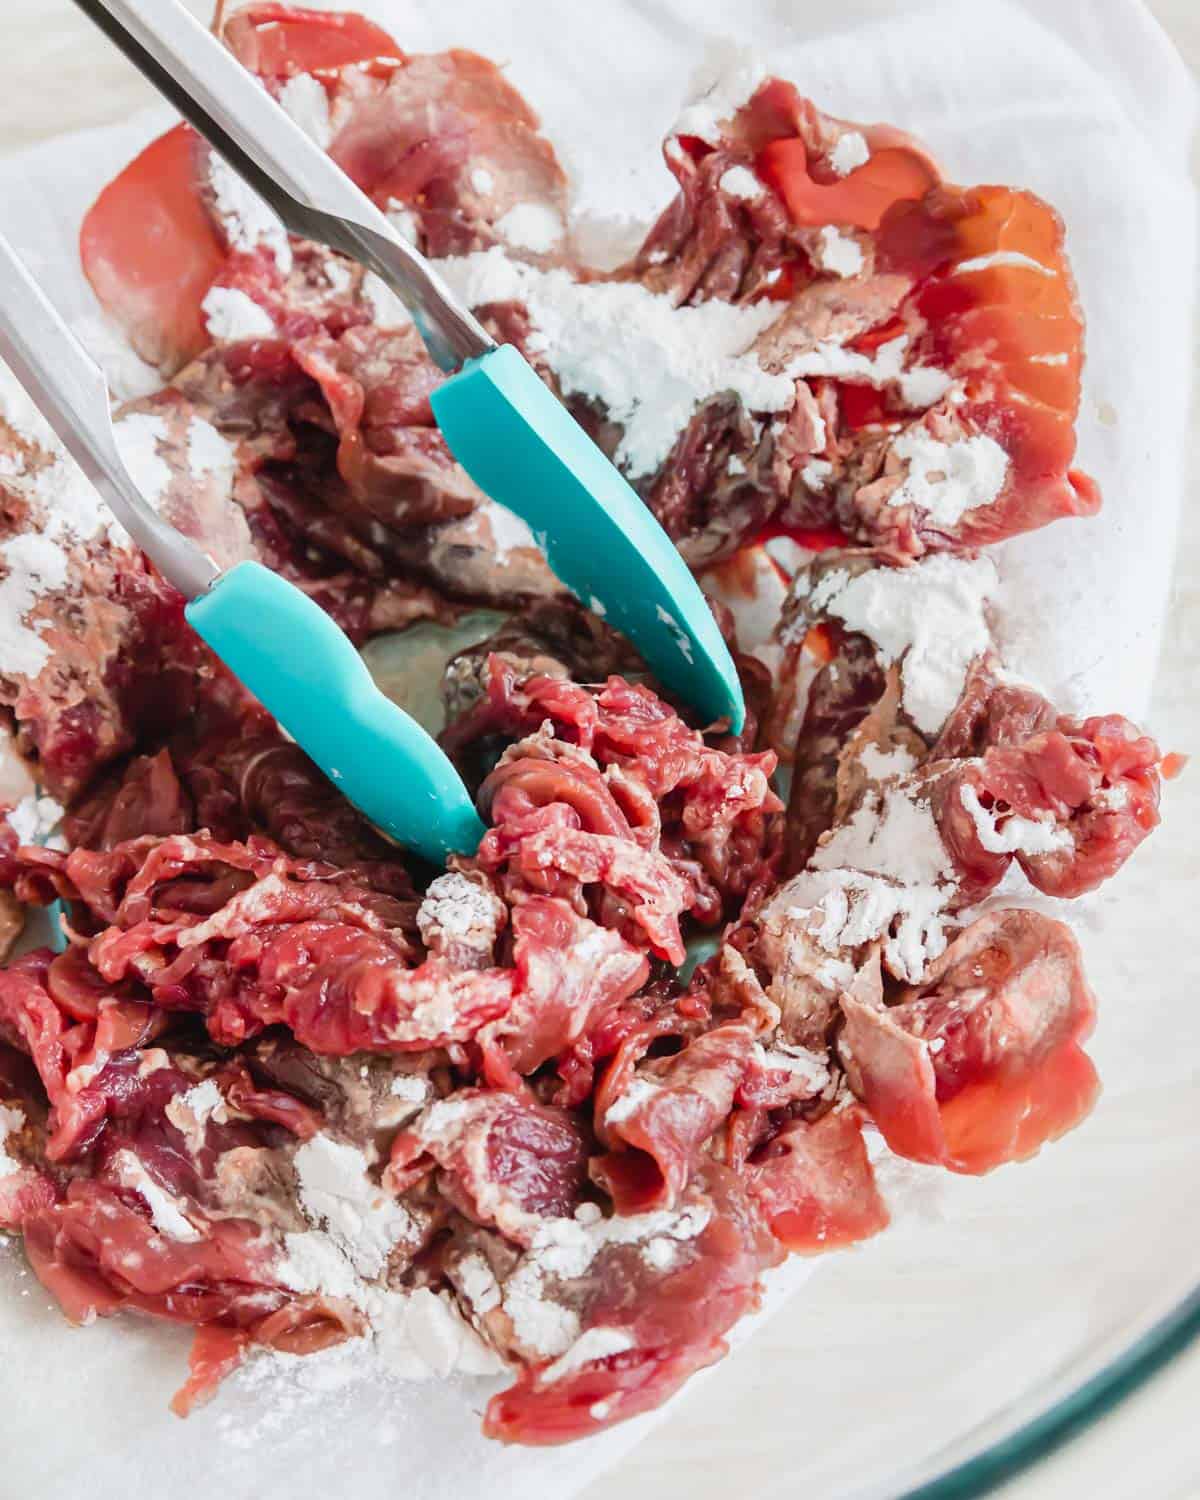 Shaved beef steak tossed with arrowroot powder in a bowl with tongs.